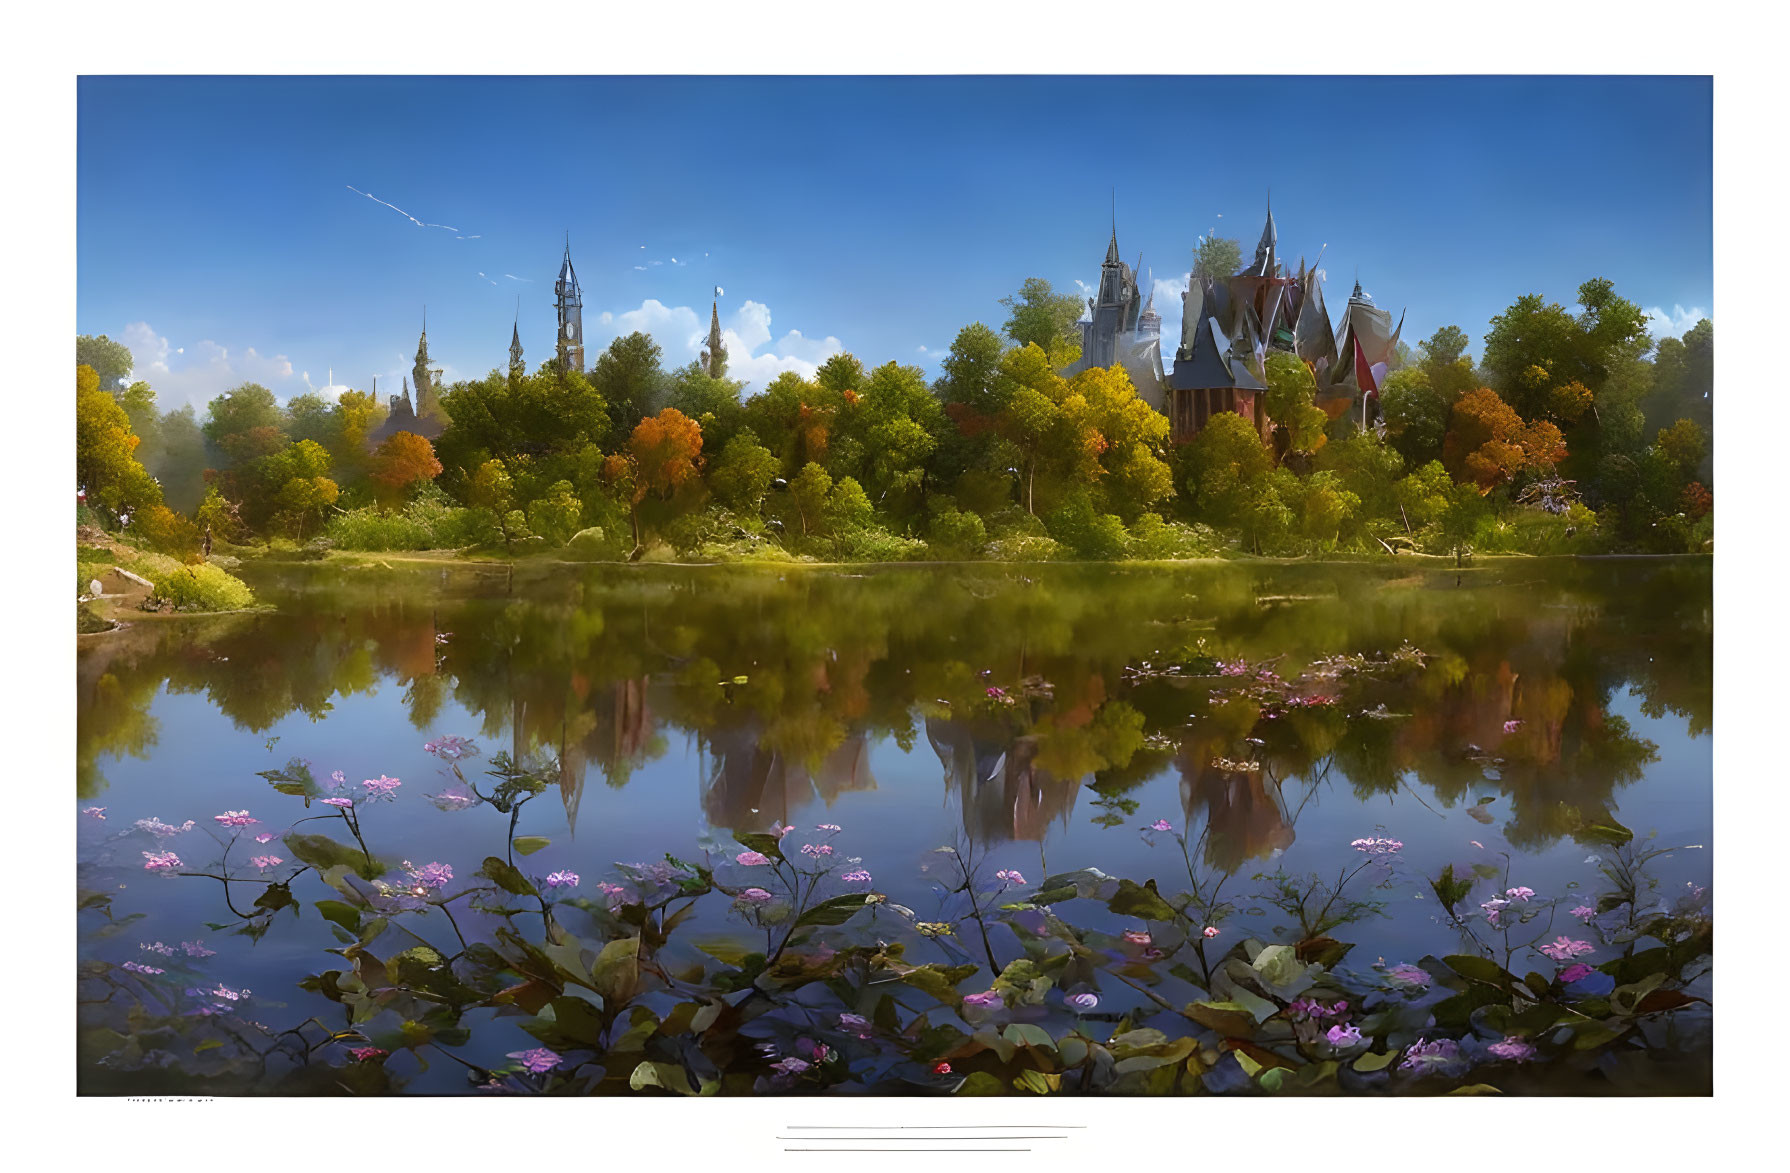 Majestic castle reflected in calm lake amid autumn trees